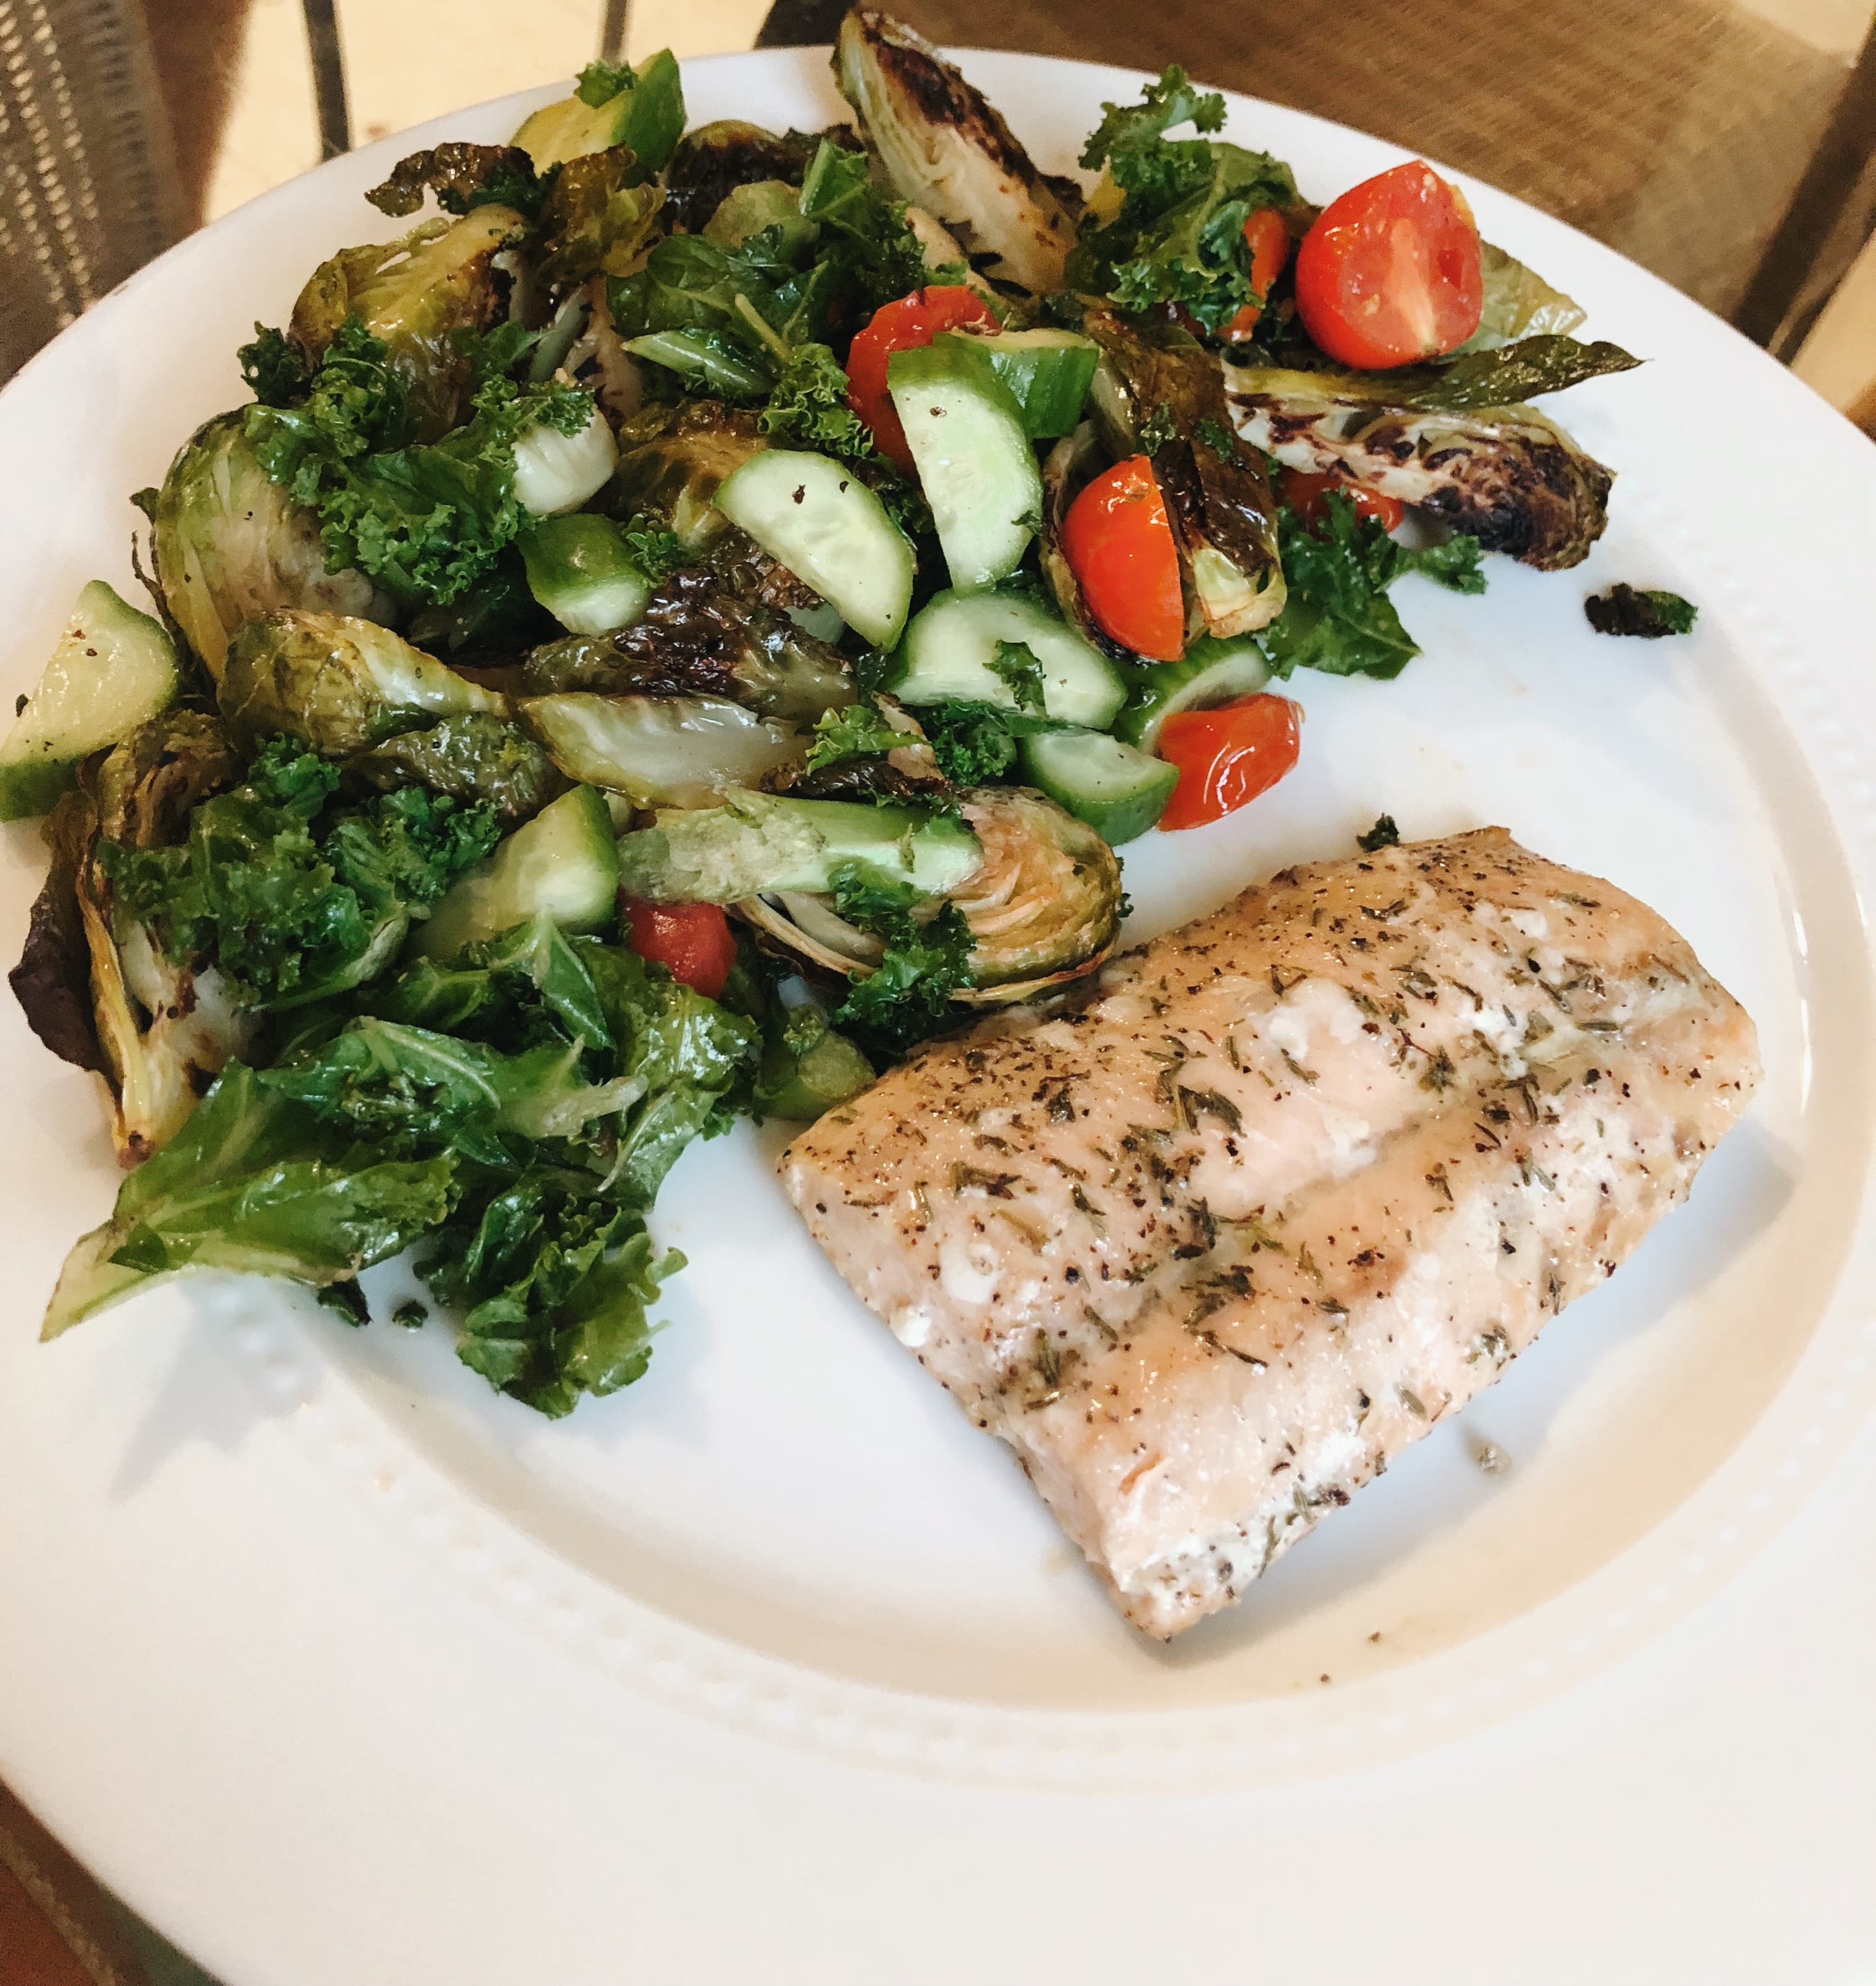 Daily Greens Kale Brussel Sprouts Cucumber Tomatoes and Salmon